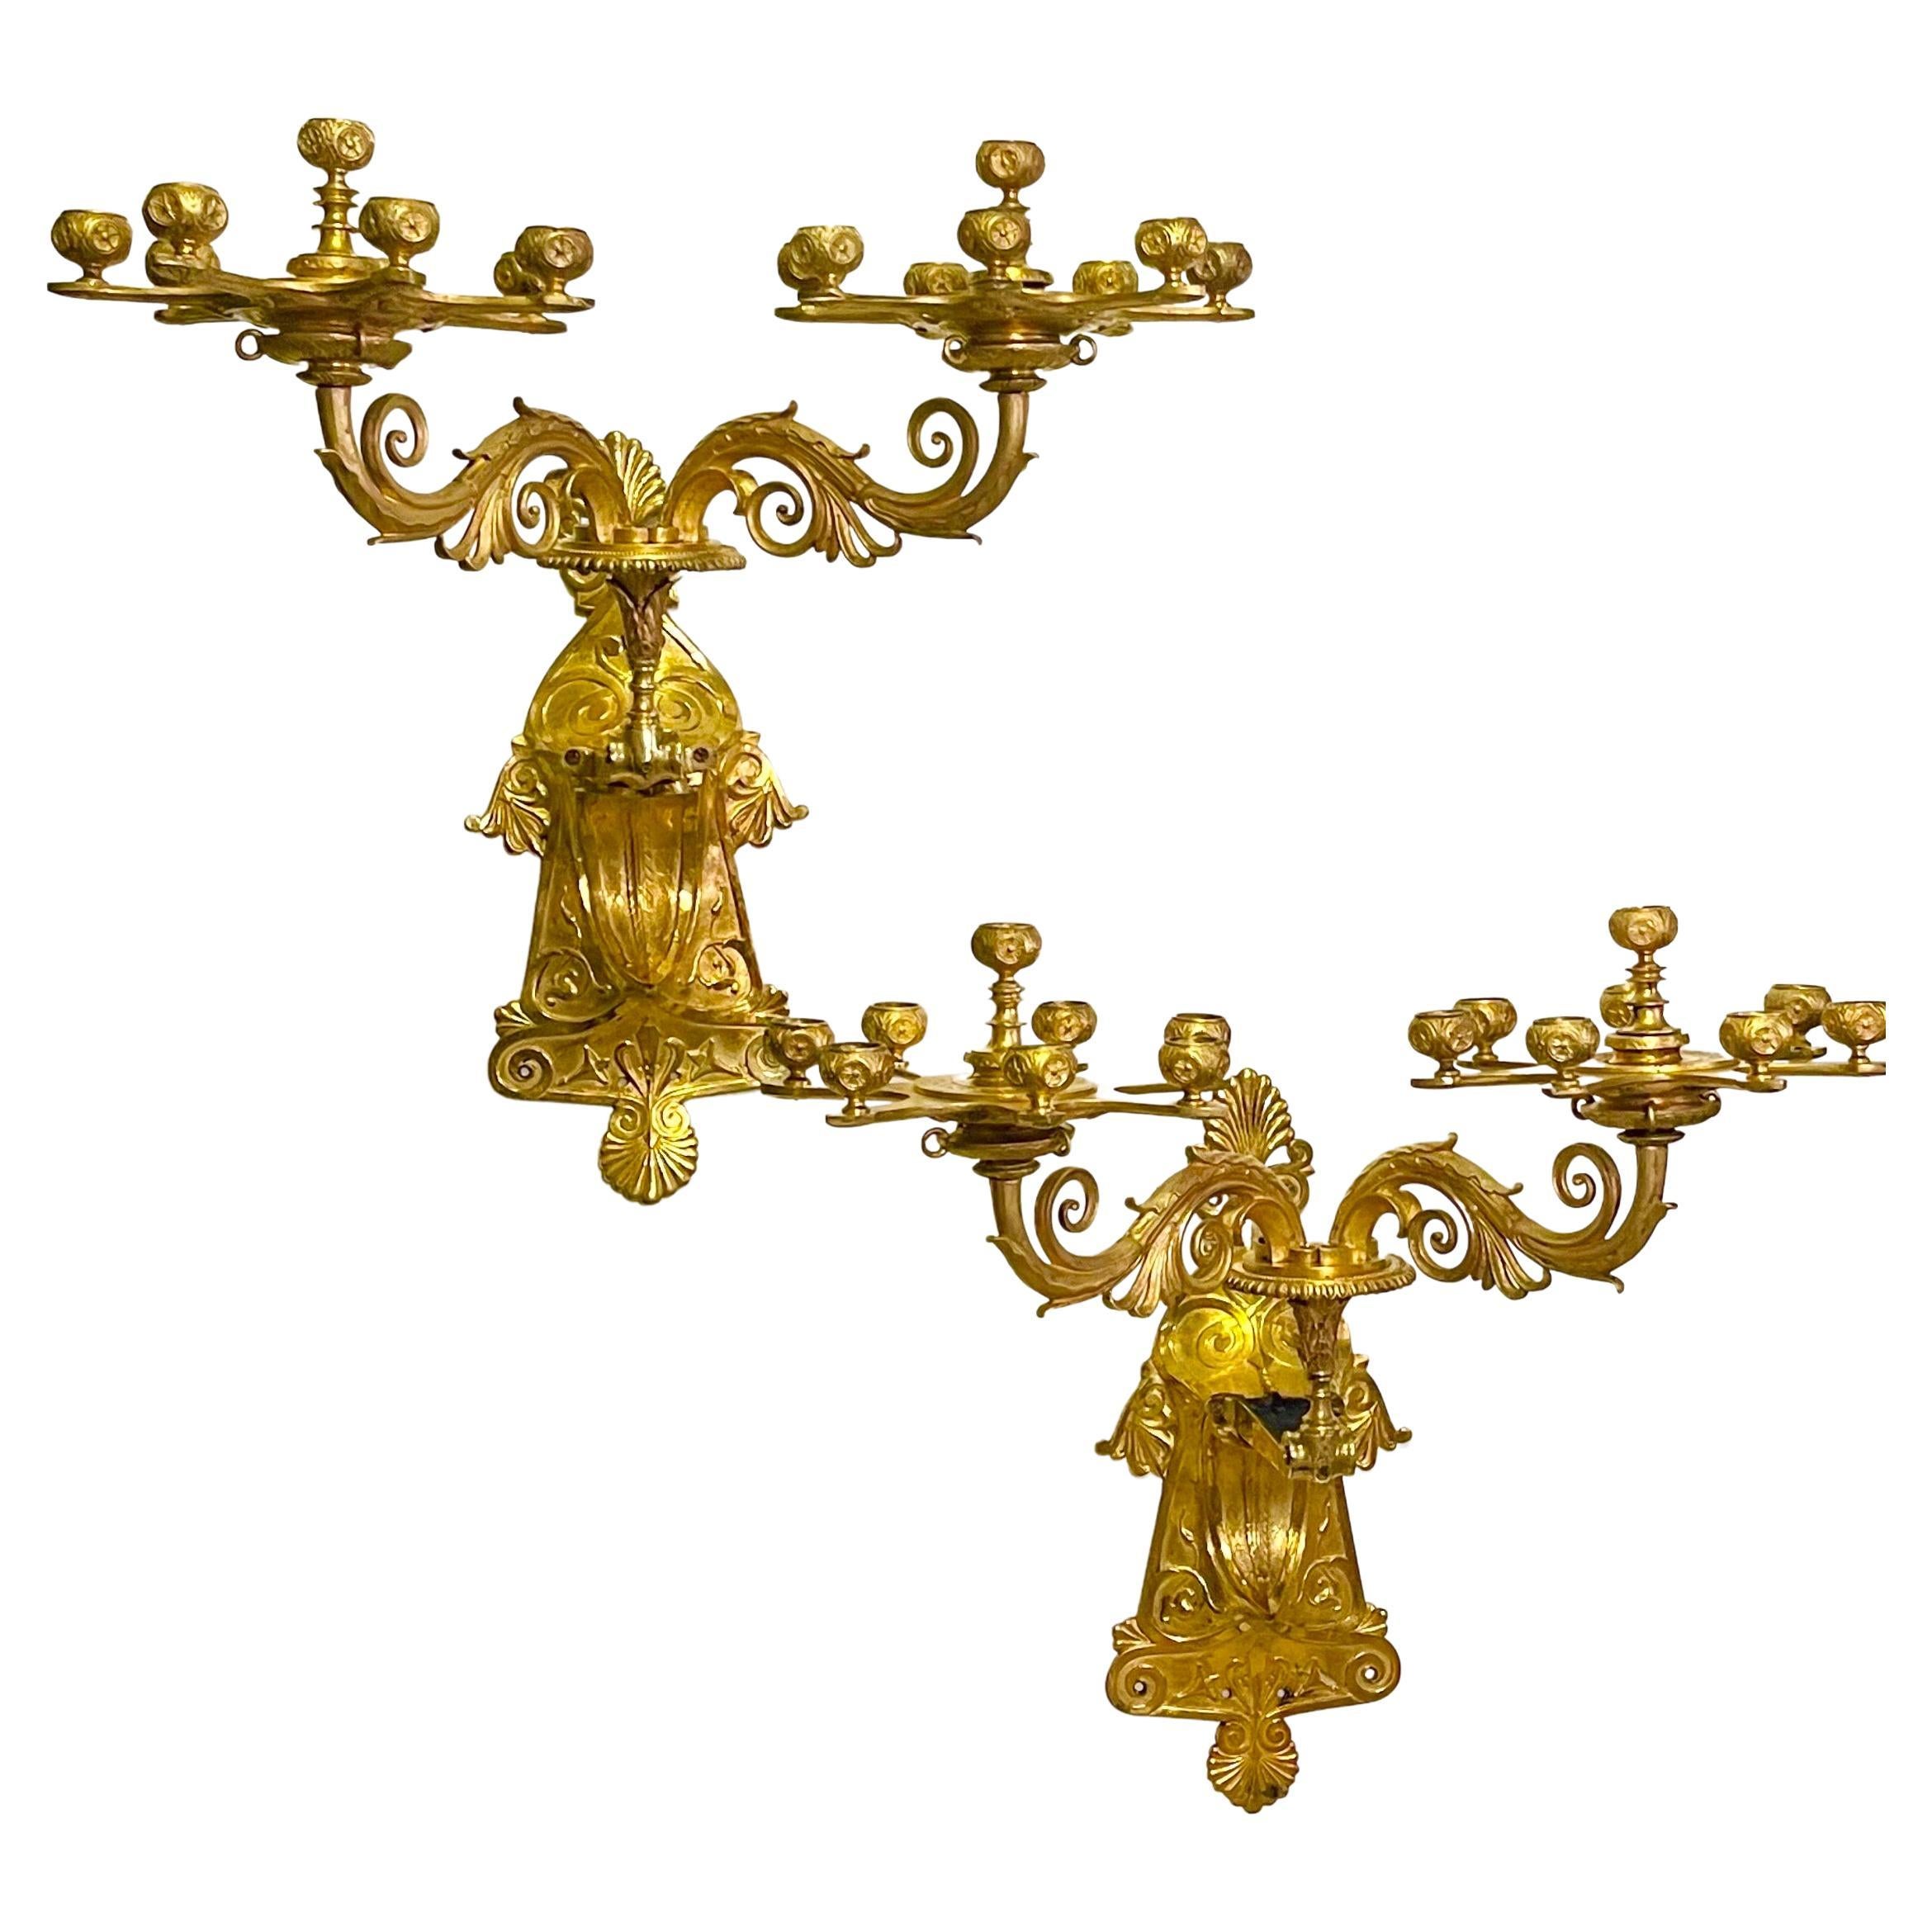 Pair of Stunning Russian Empire Period Ormolu Wall Sconces , ca. 1820s